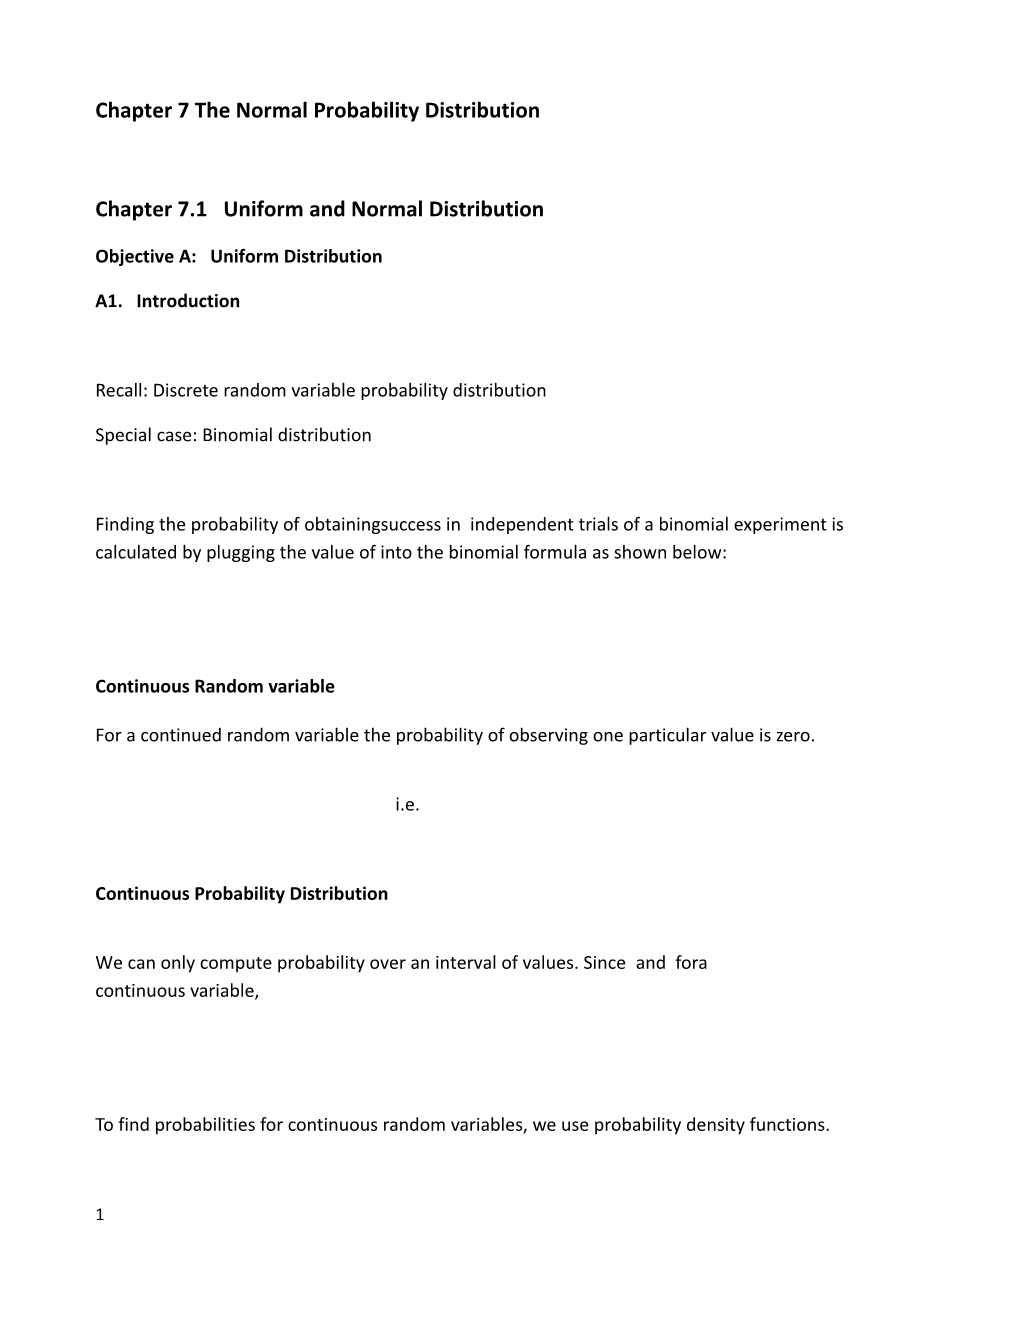 Chapter 7The Normal Probability Distribution